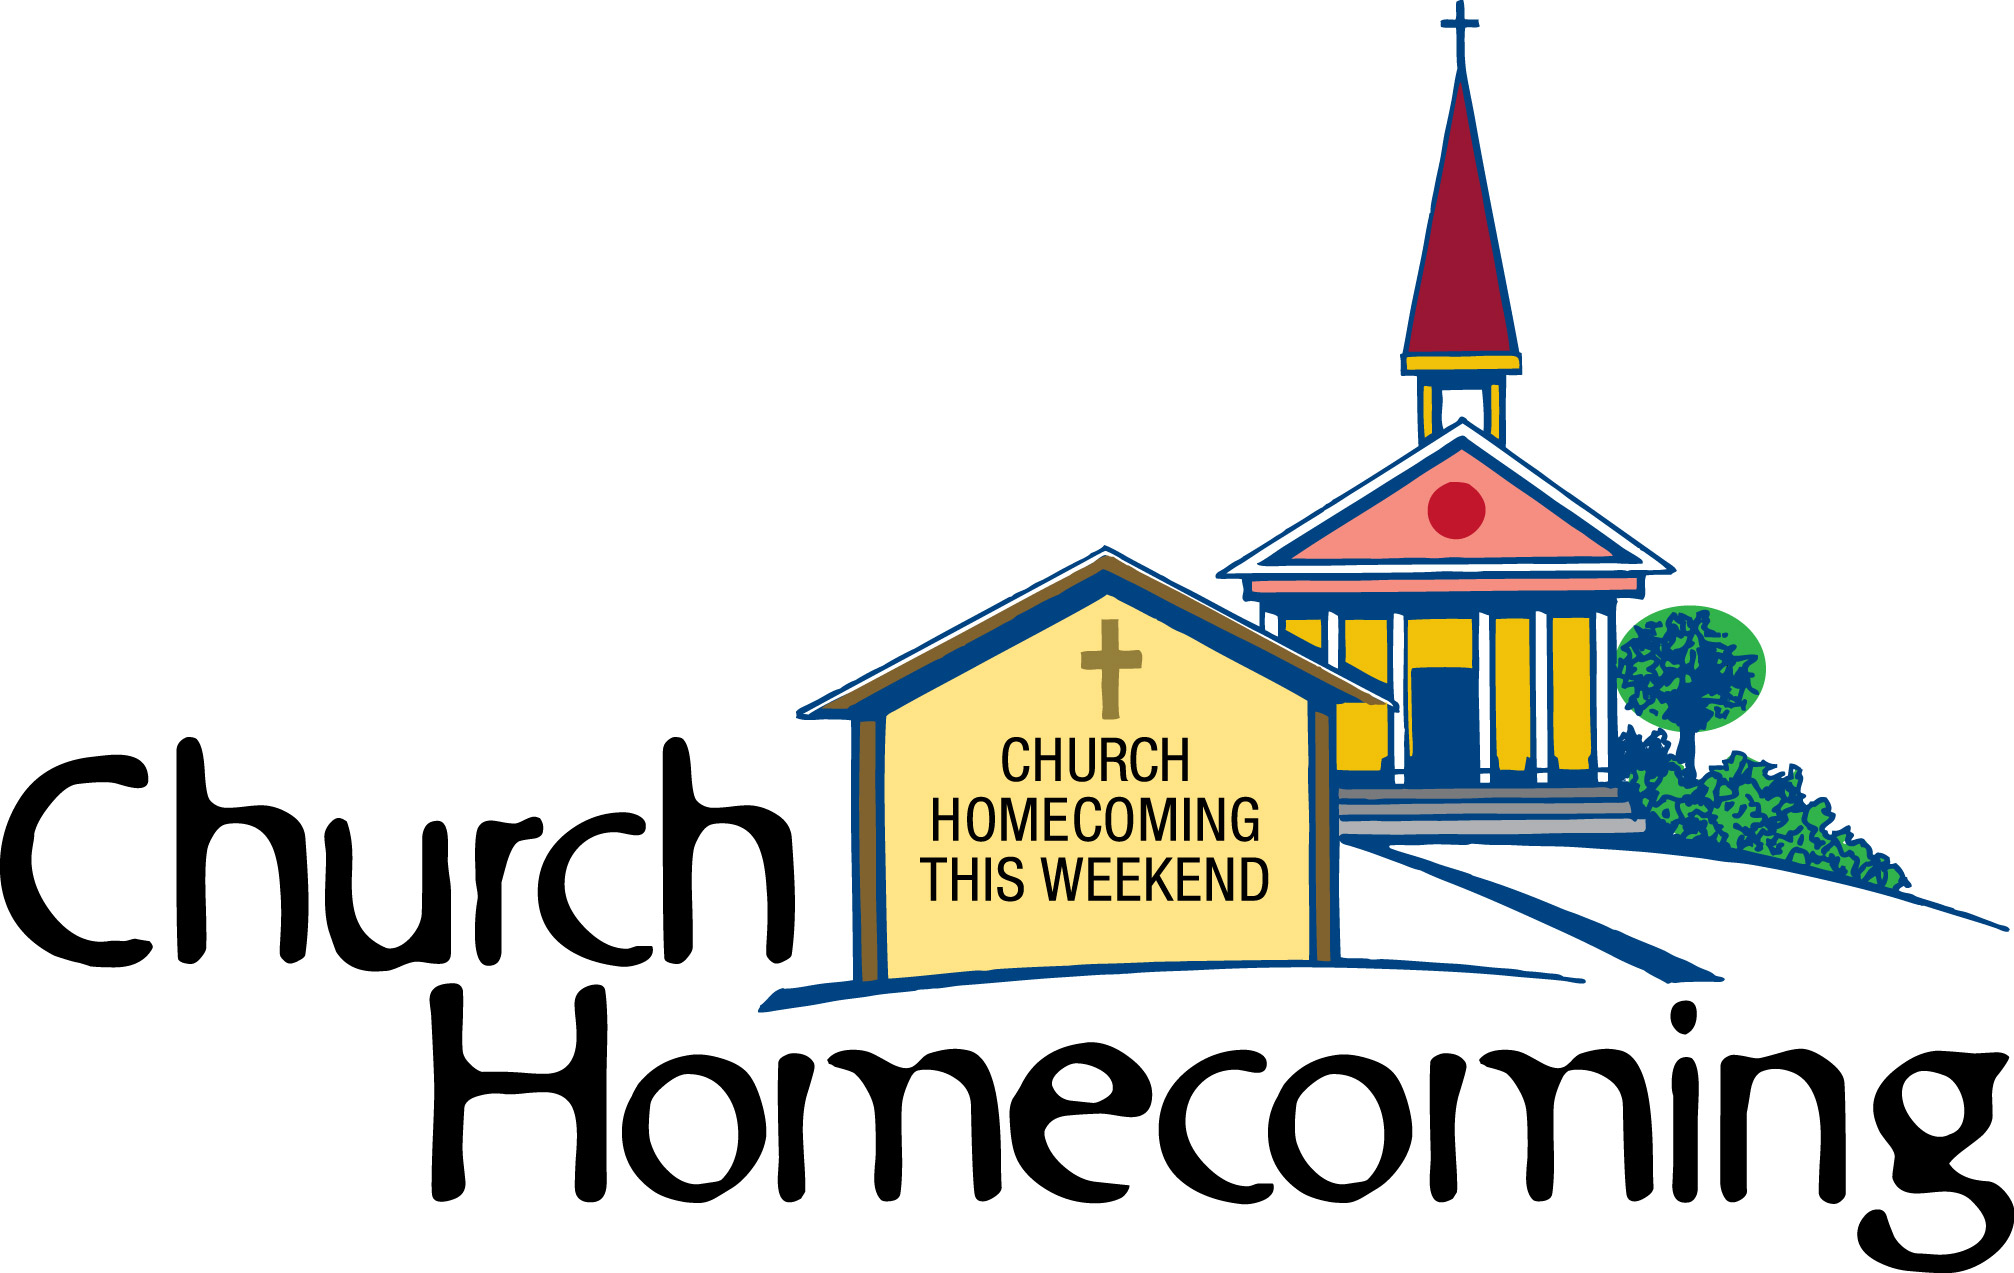 Download Church Homecoming Cl - Homecoming Clip Art